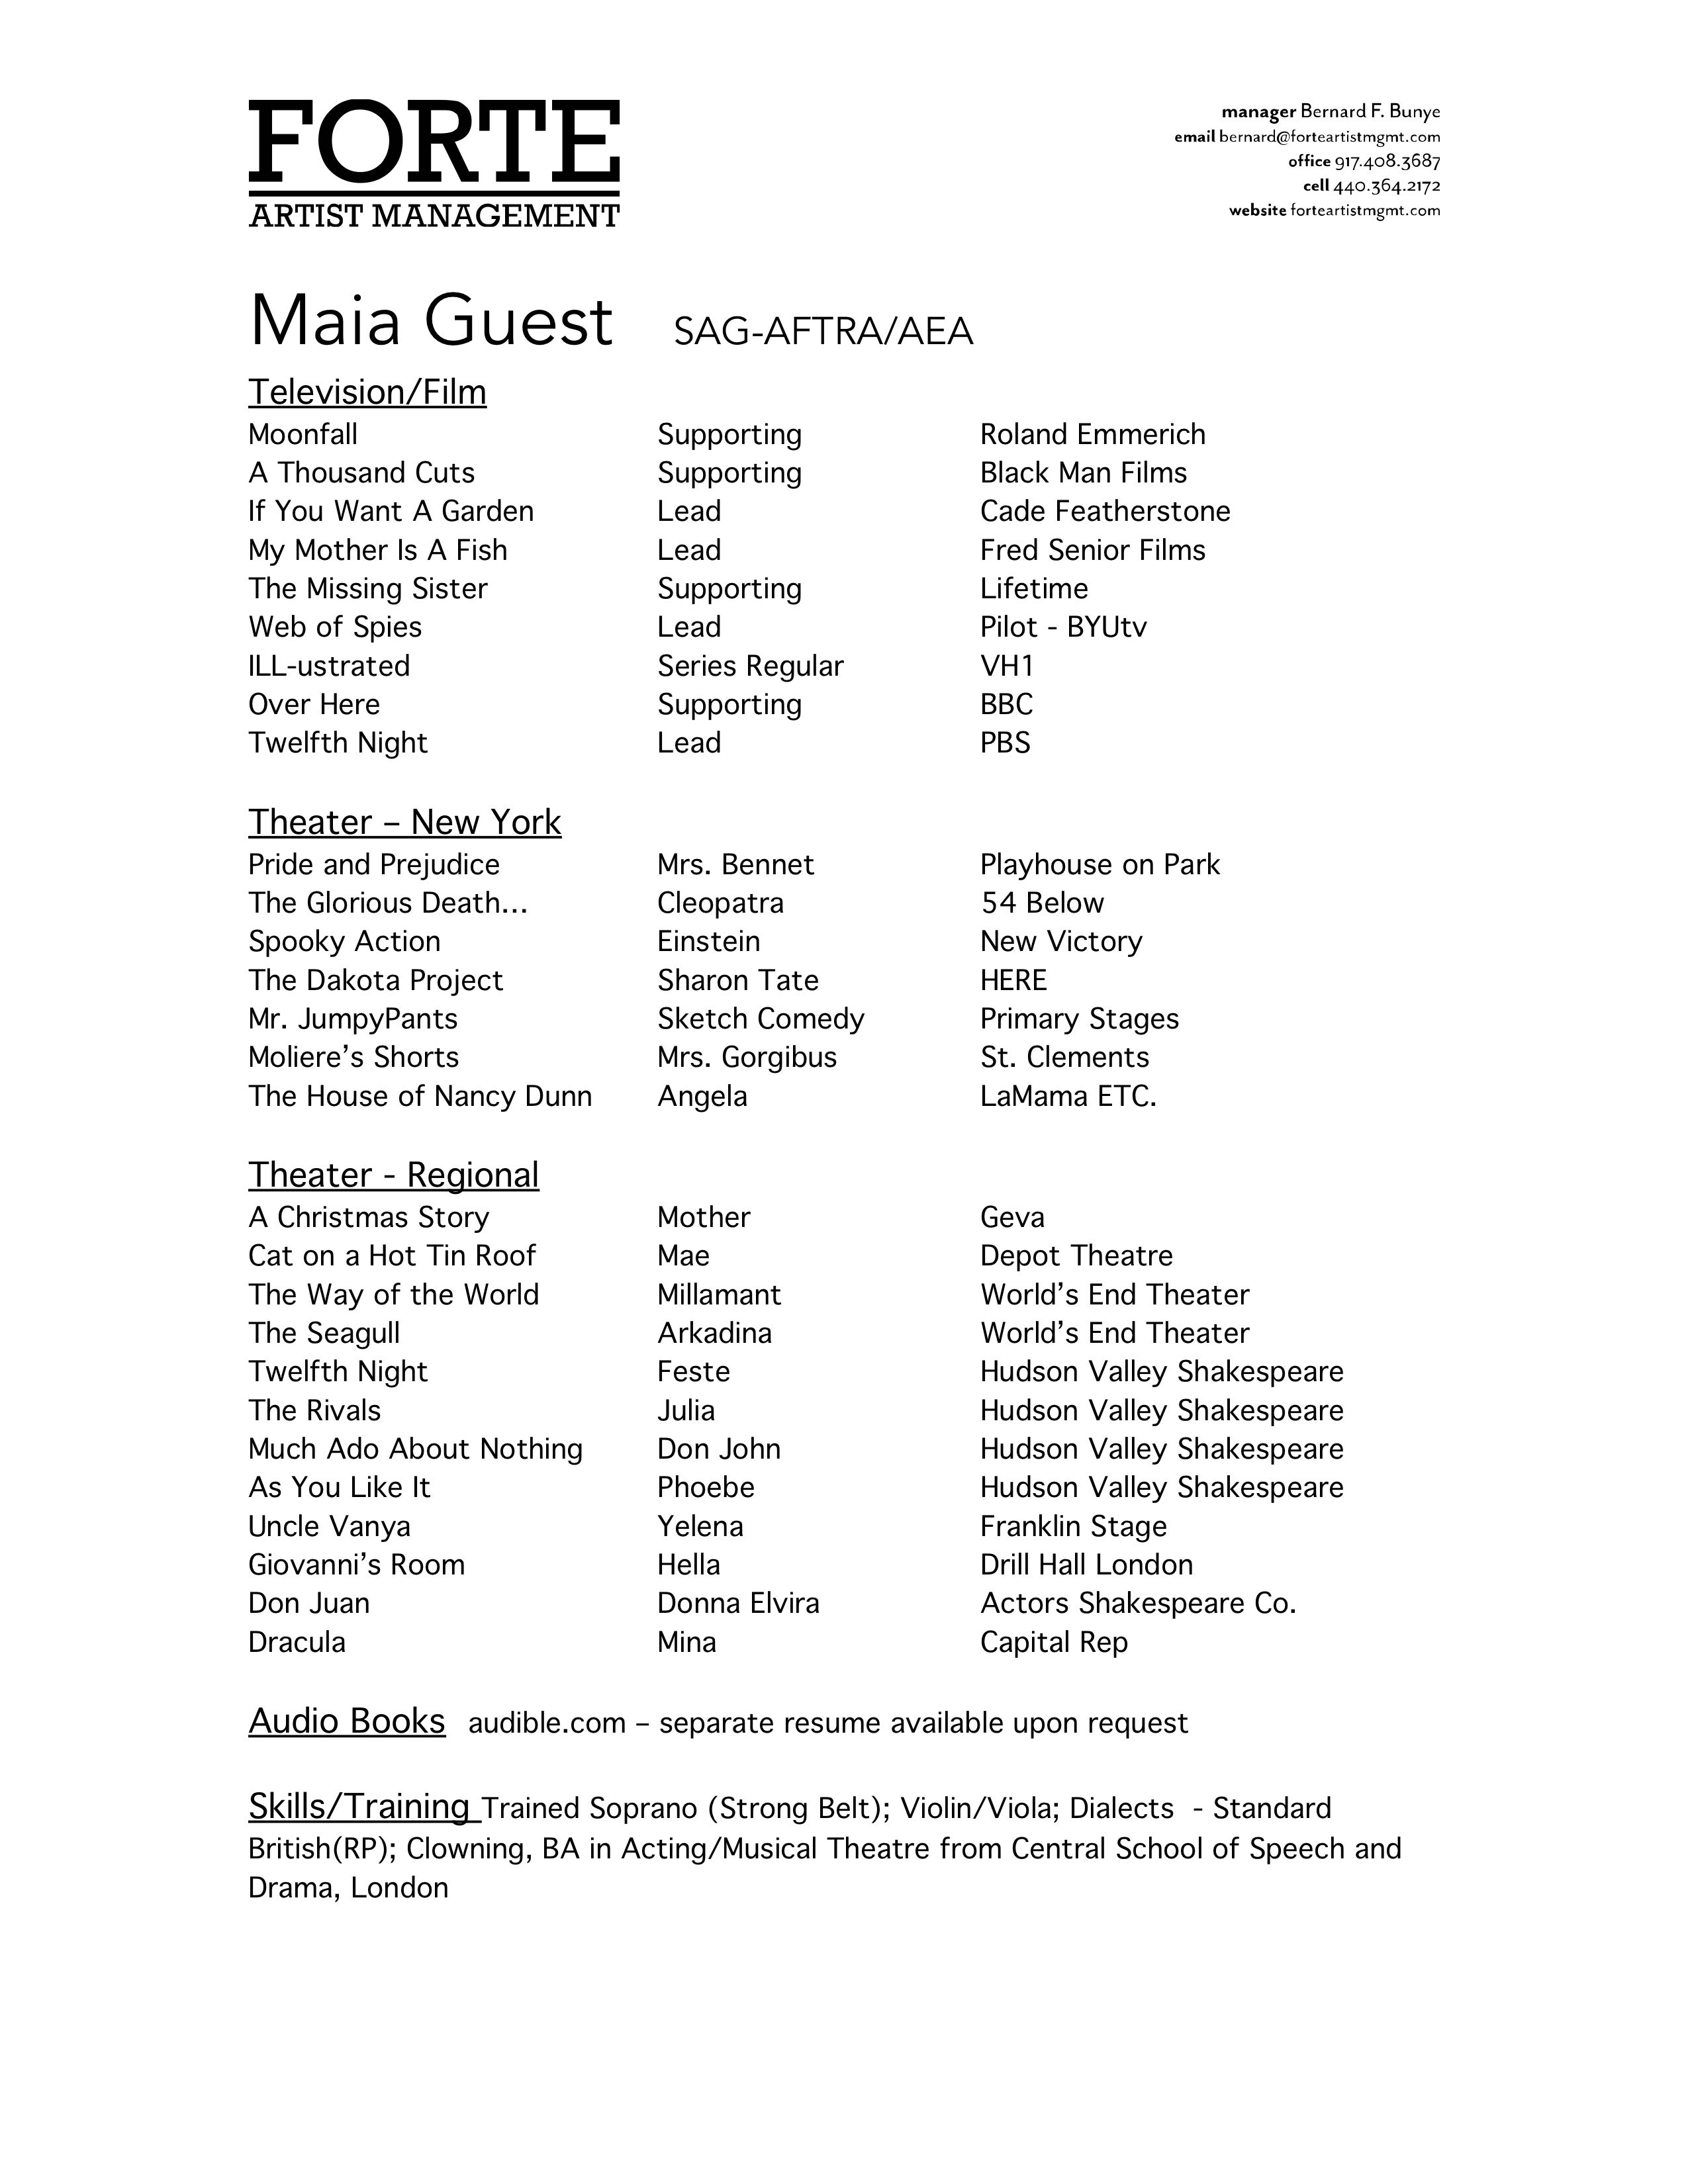 Maia Guest Resume